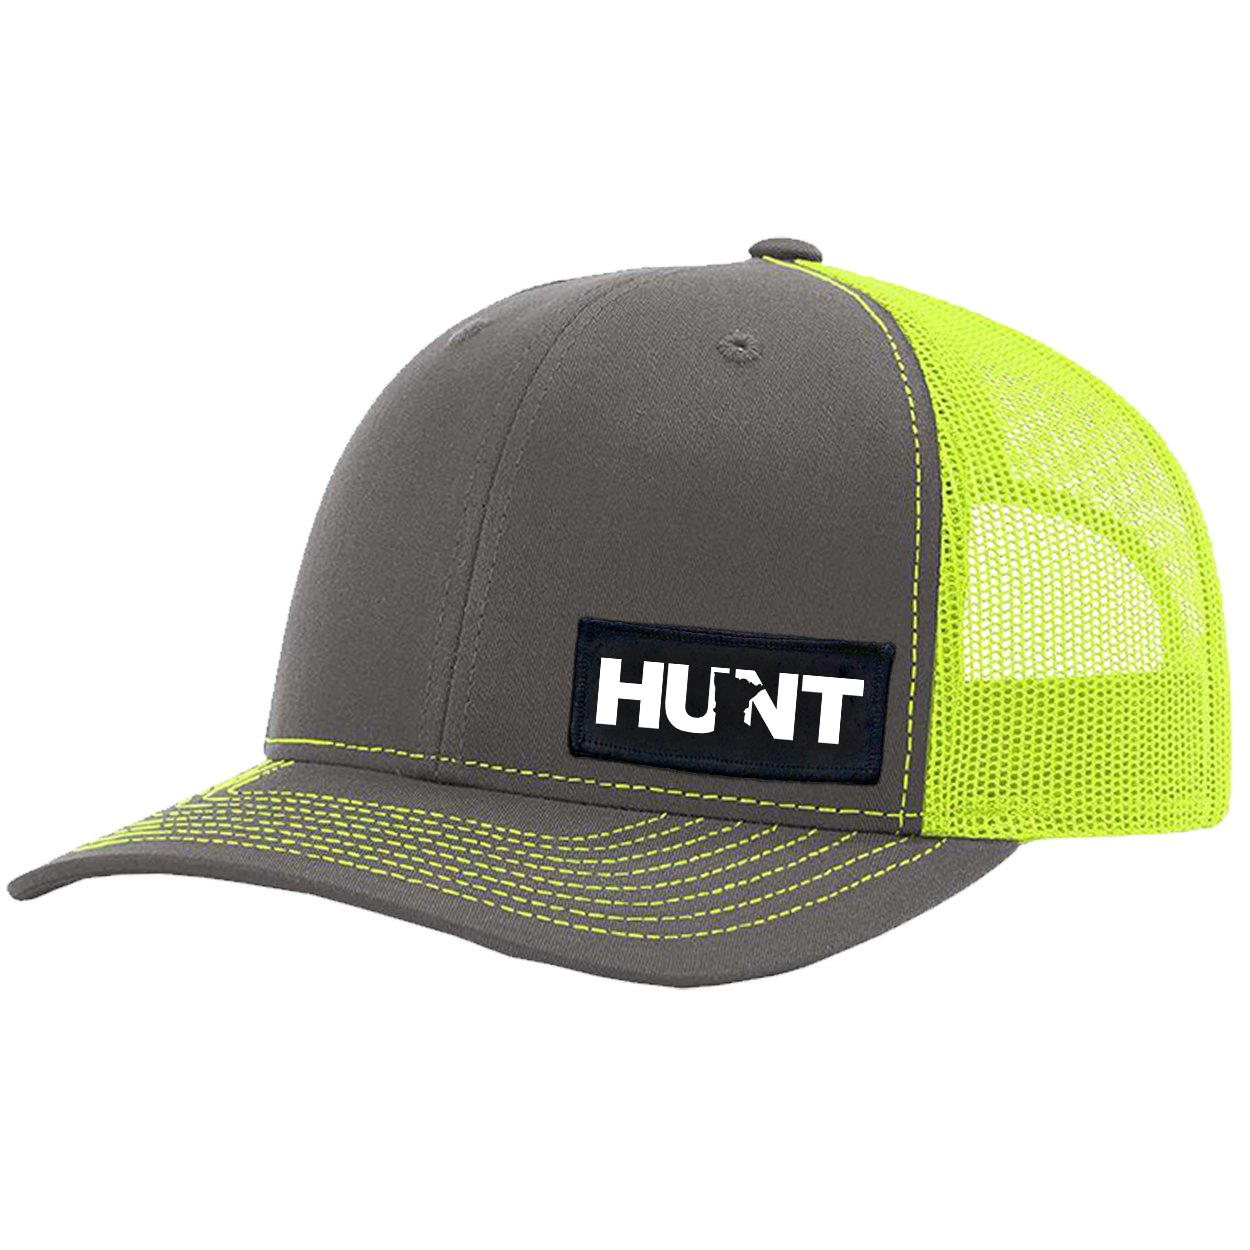 Hunt Minnesota Night Out Woven Patch Snapback Trucker Hat Charcoal/Neon Yellow (White Logo)